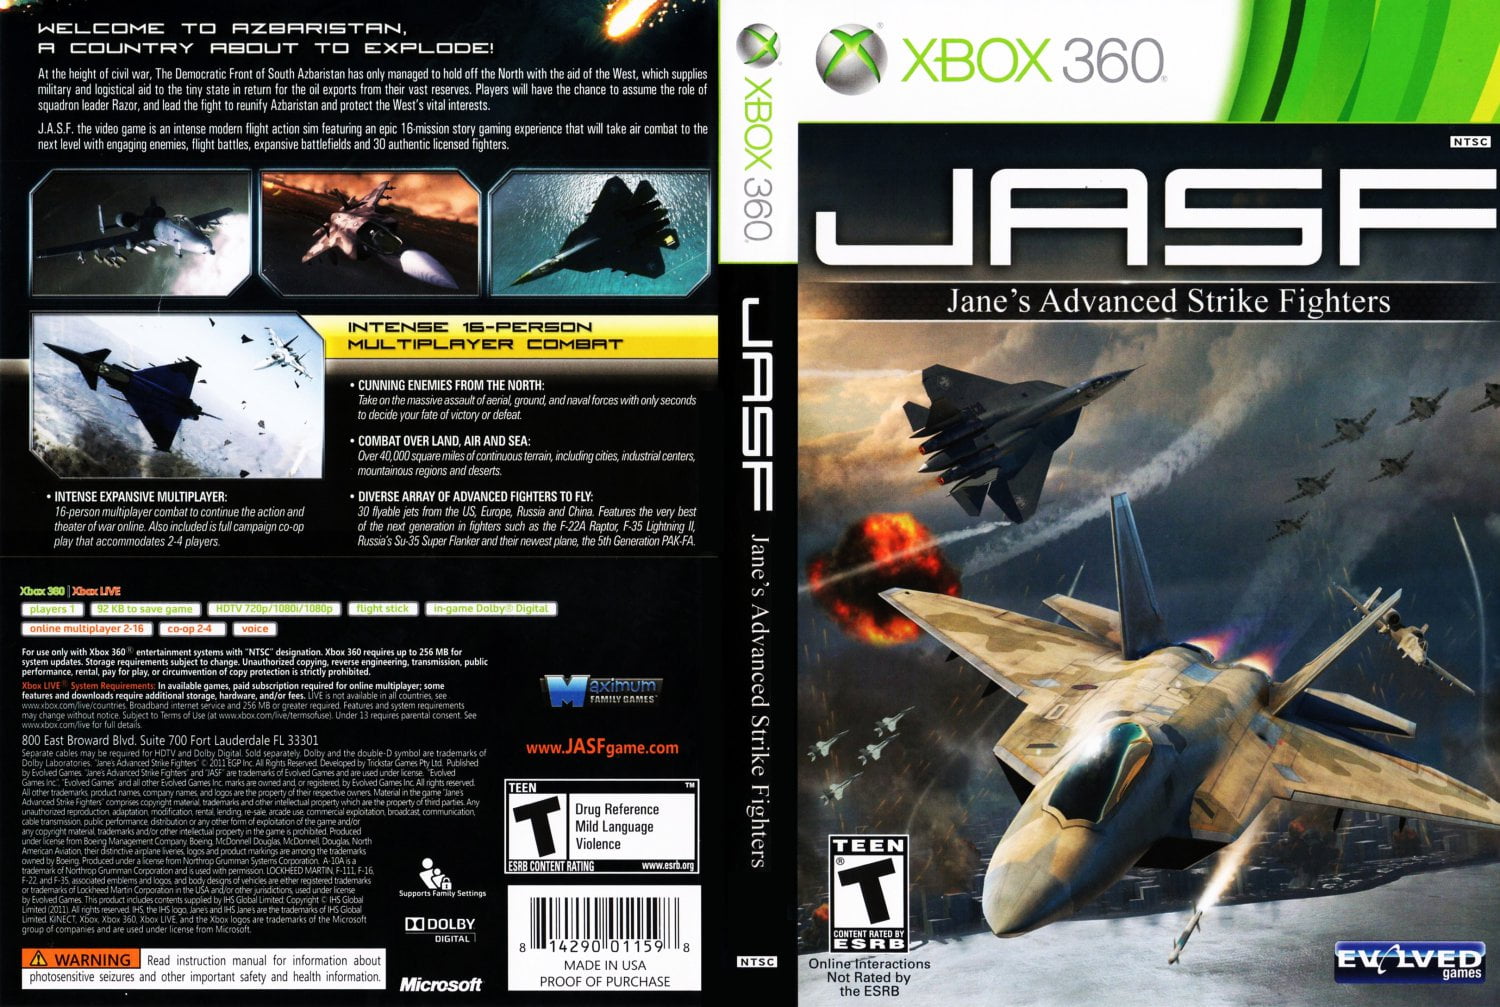 JASF: Jane's Advanced Strike Fighters Review